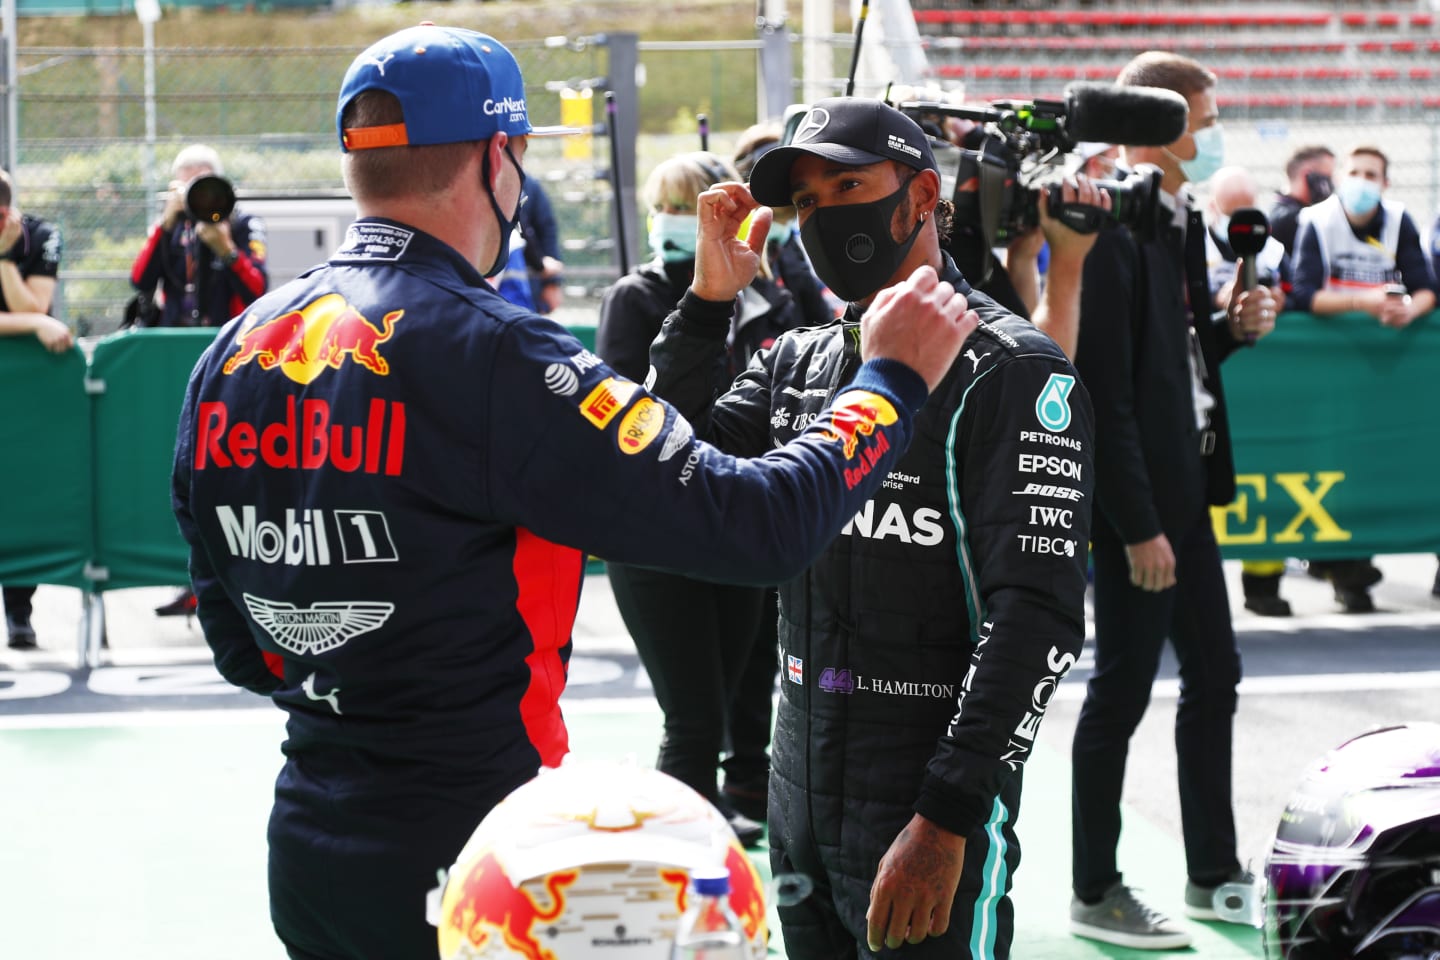 SPA, BELGIUM - AUGUST 29: Pole position qualifier Lewis Hamilton of Great Britain and Mercedes GP and third place qualifier Max Verstappen of Netherlands and Red Bull Racing talk in parc ferme during qualifying for the F1 Grand Prix of Belgium at Circuit de Spa-Francorchamps on August 29, 2020 in Spa, Belgium. (Photo by Francois Lenoir/Pool via Getty Images)